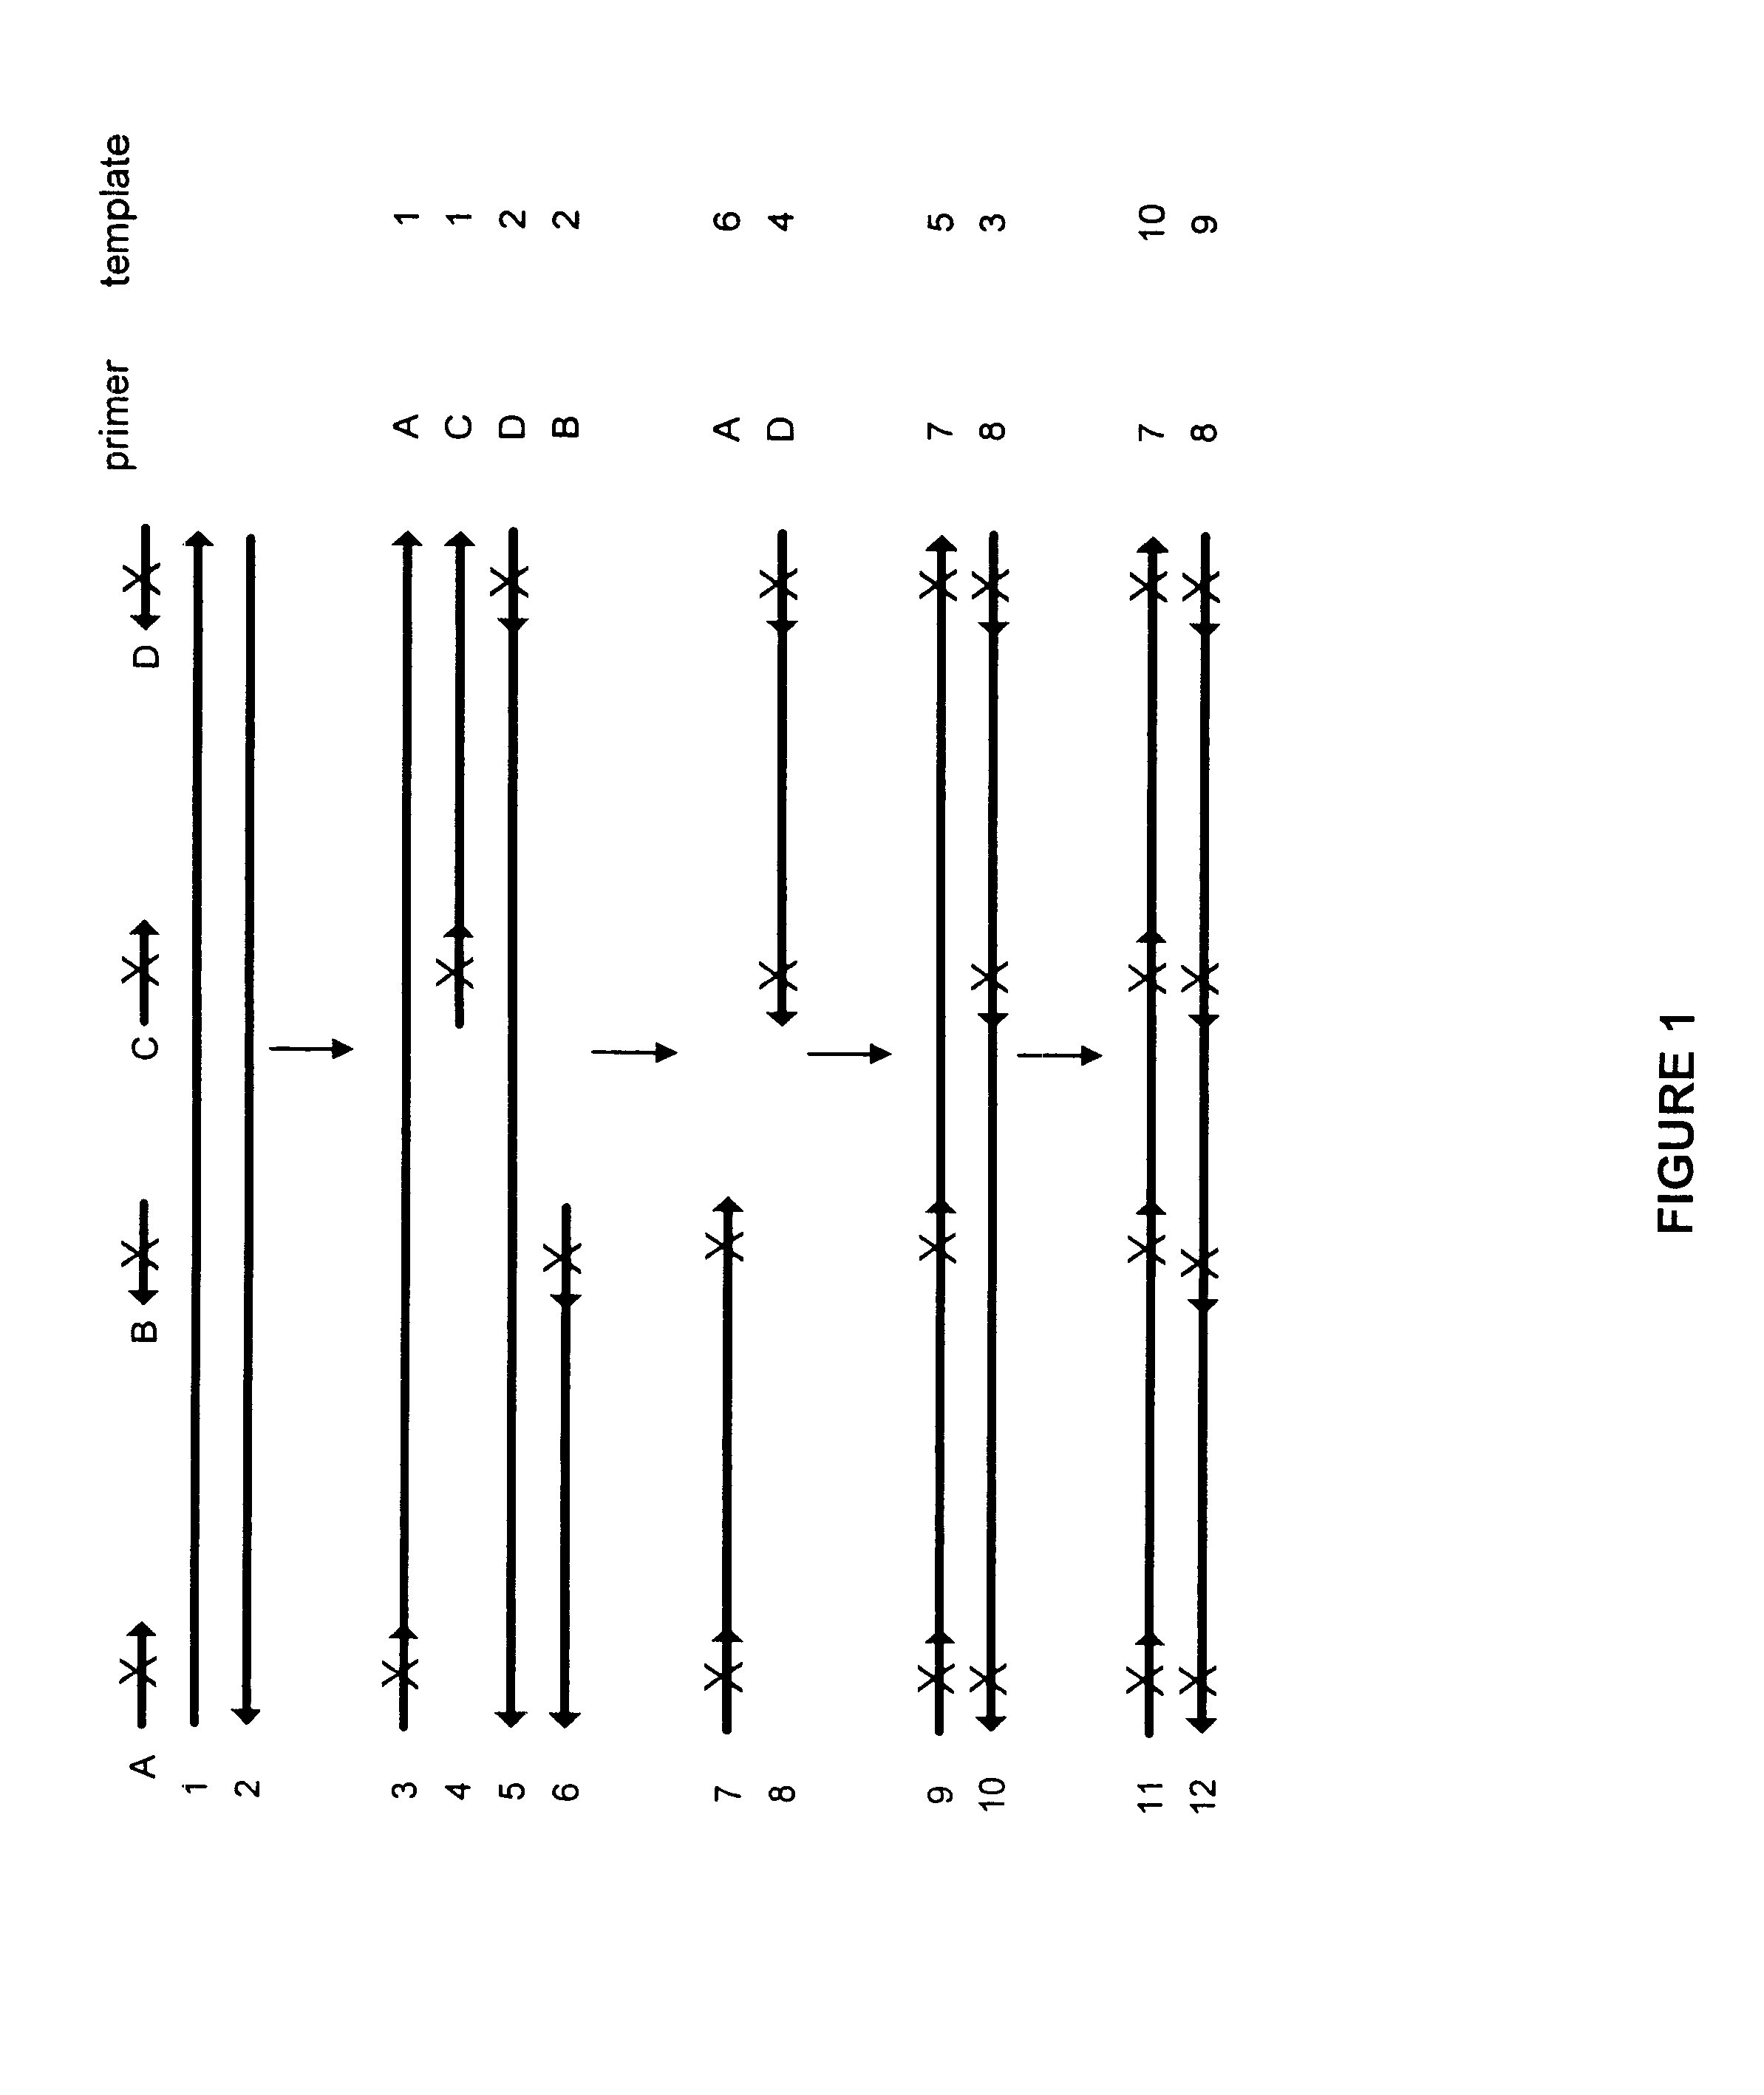 Method for generating a library of oligonucleotides comprising a controlled distribution of mutations